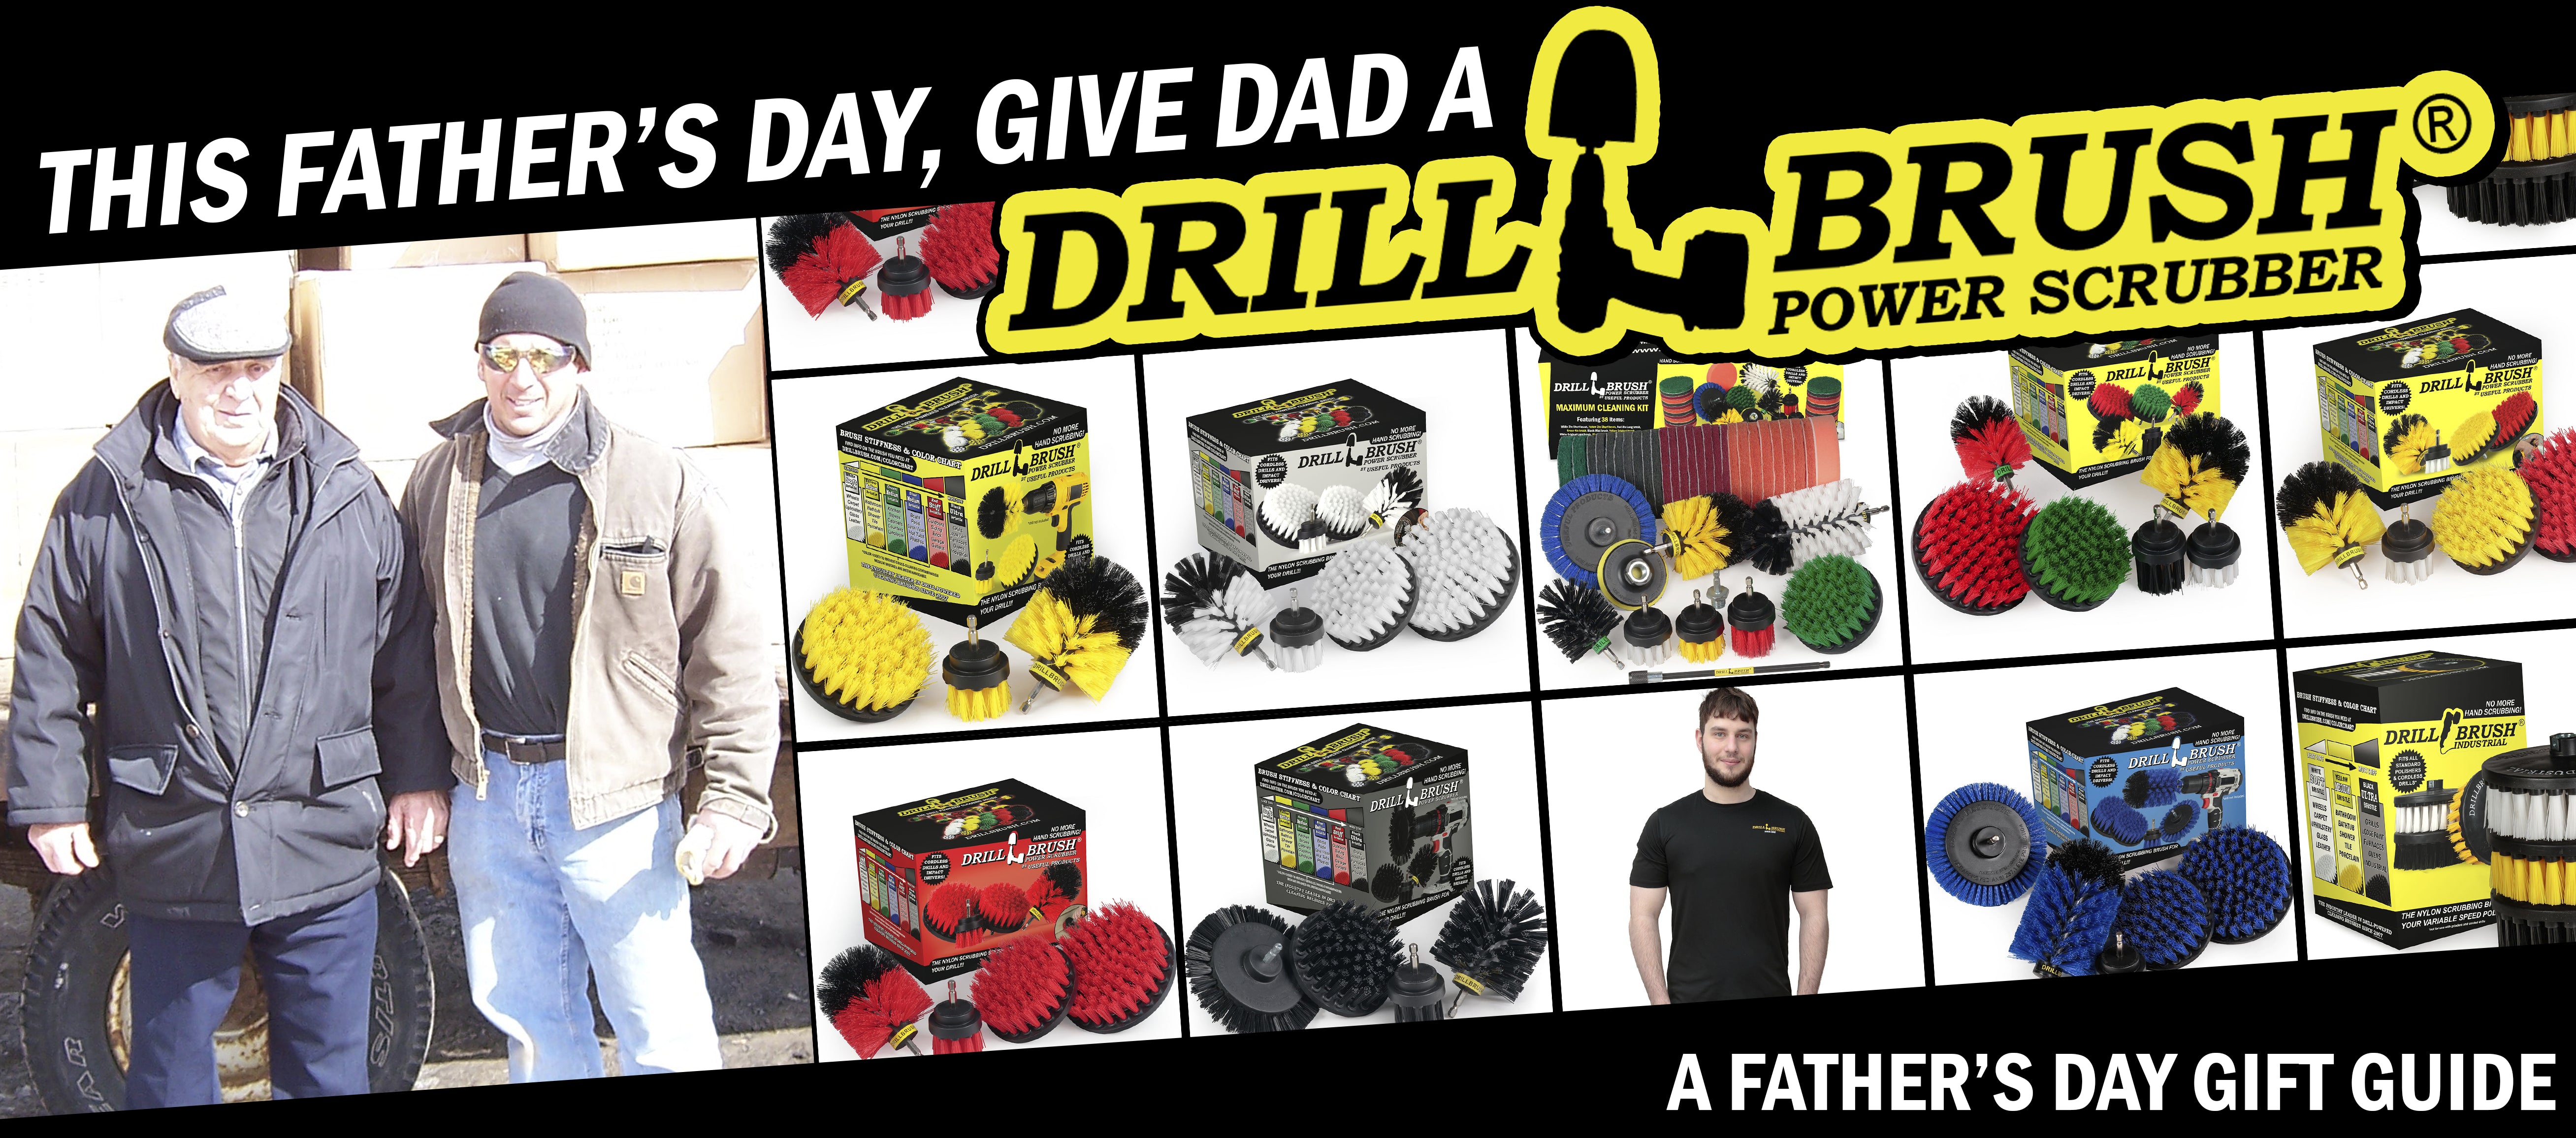 Drillbrush: The Perfect Father's Day Present! - A Drillbrush Gift Guide